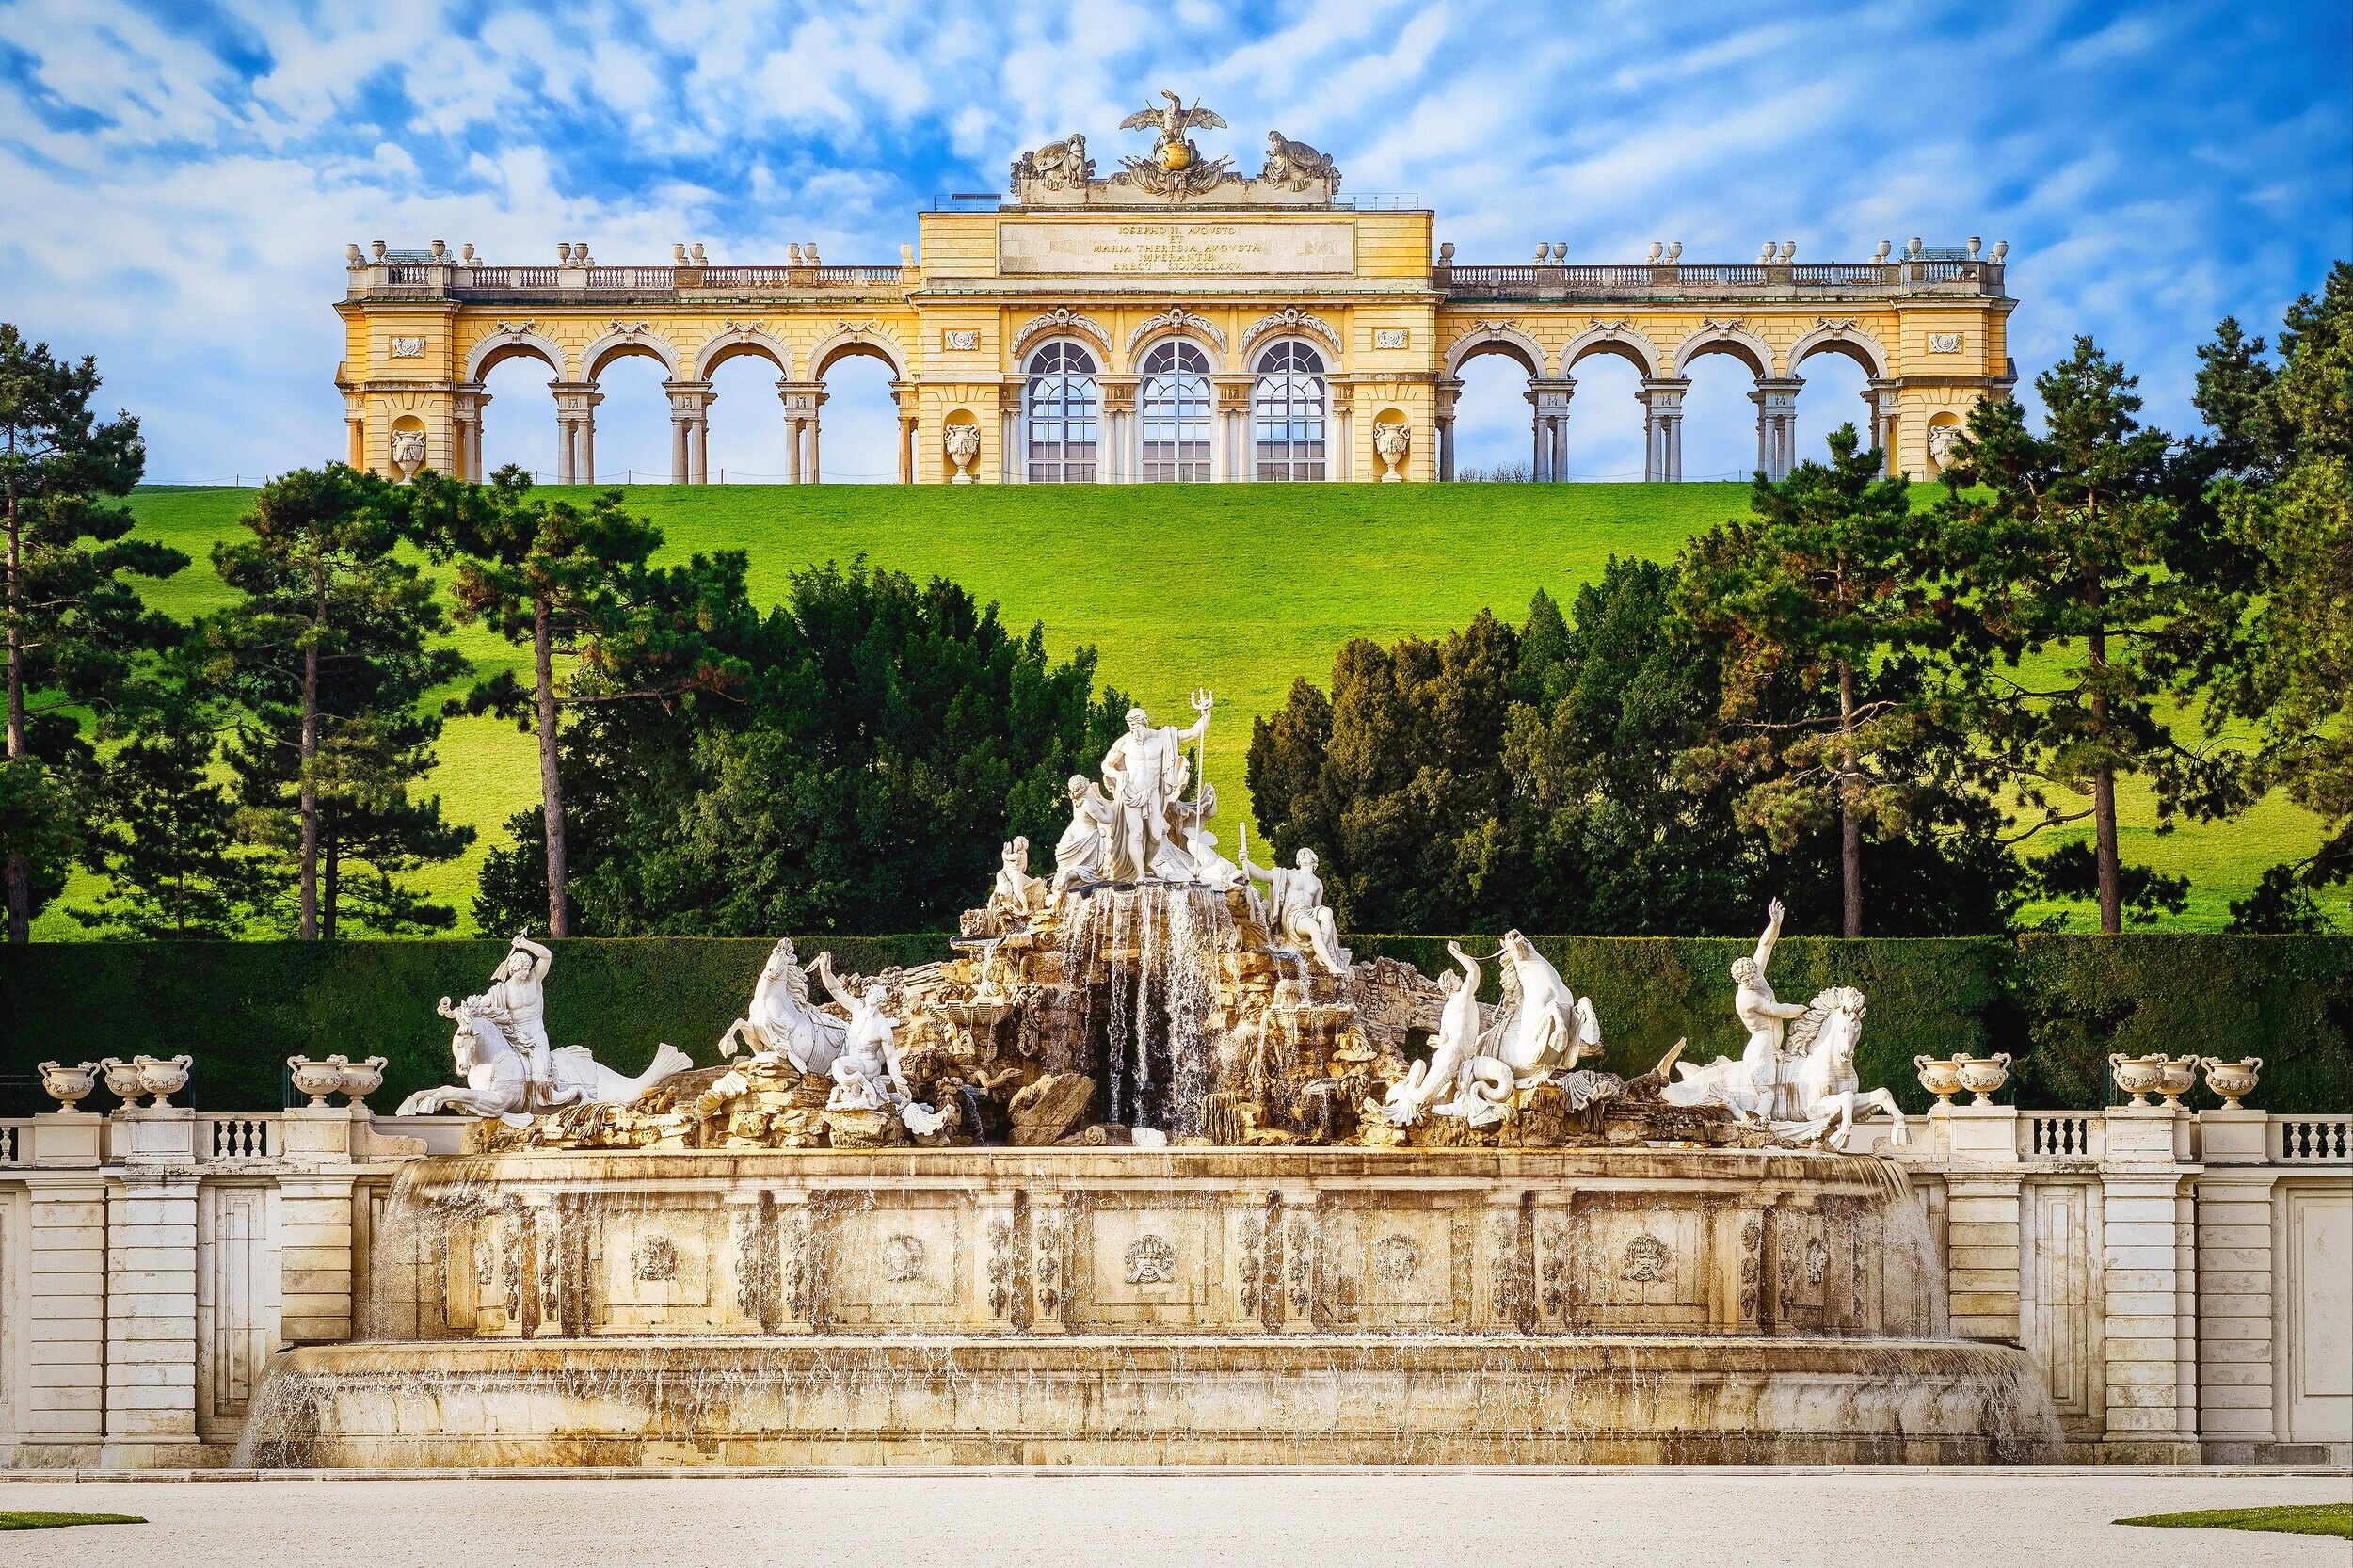 The Gloriette with the Neptune Fountain